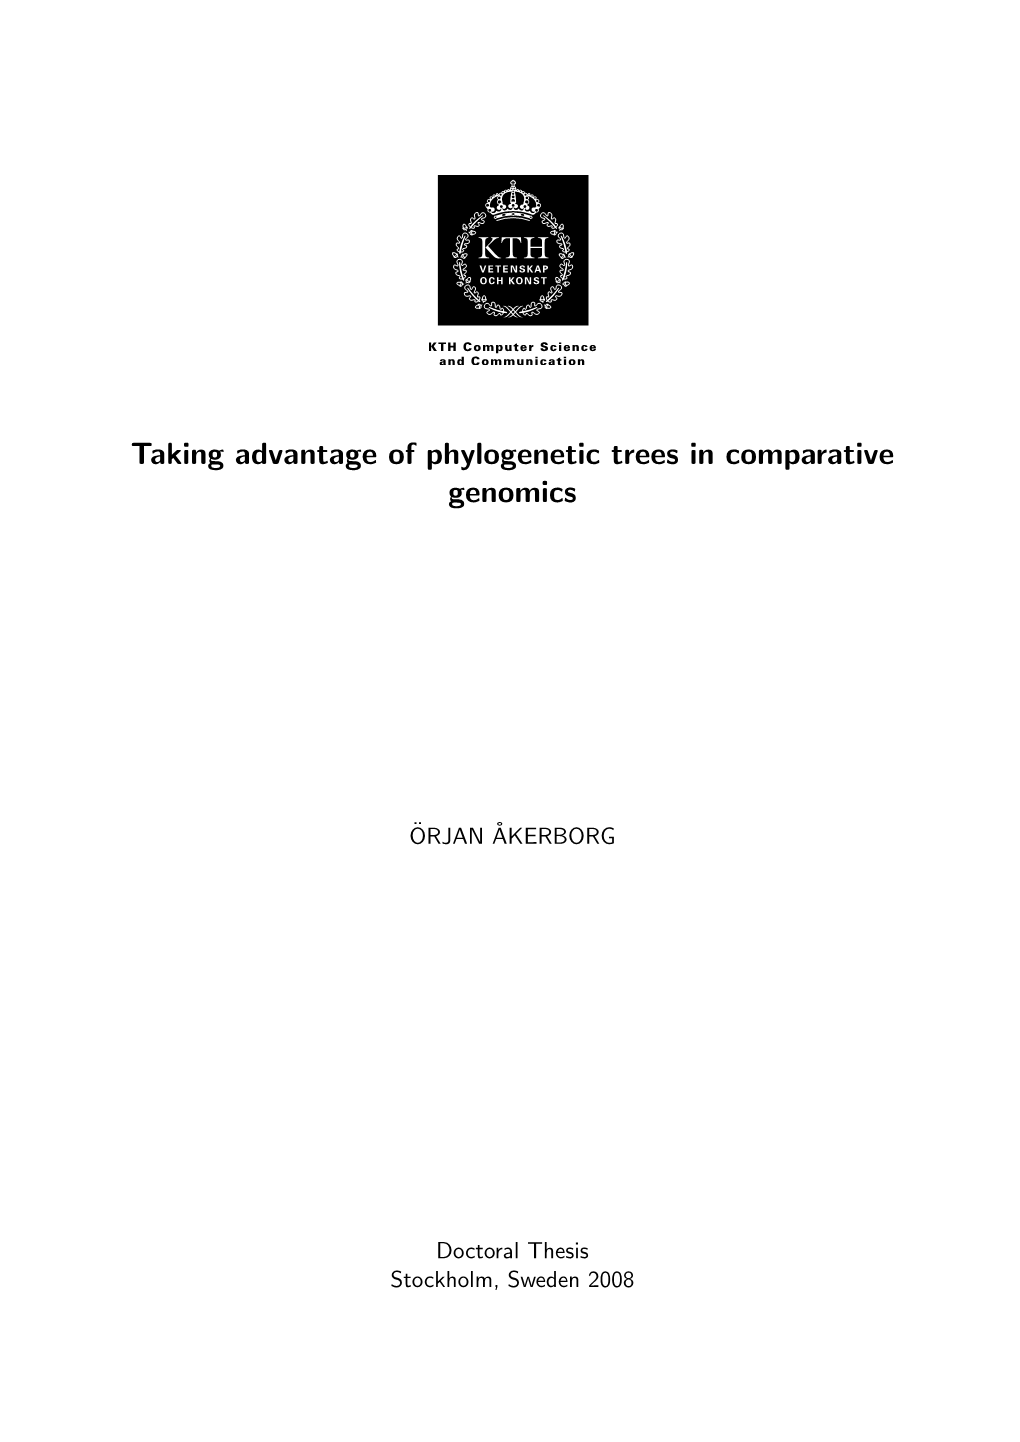 Taking Advantage of Phylogenetic Trees in Comparative Genomics